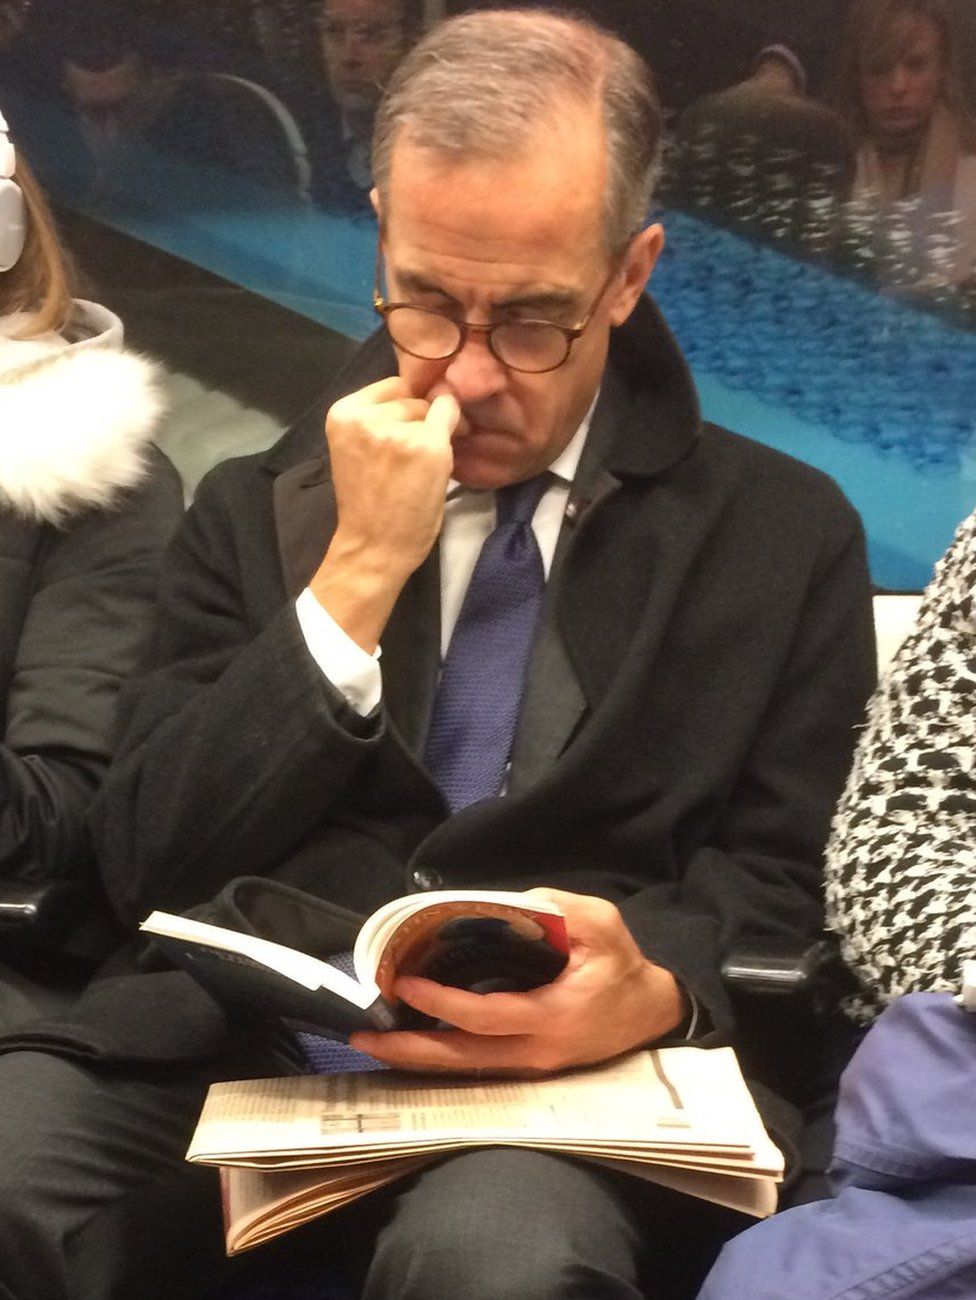 Mark Carney photographed on the tube reading Justin Welby's book